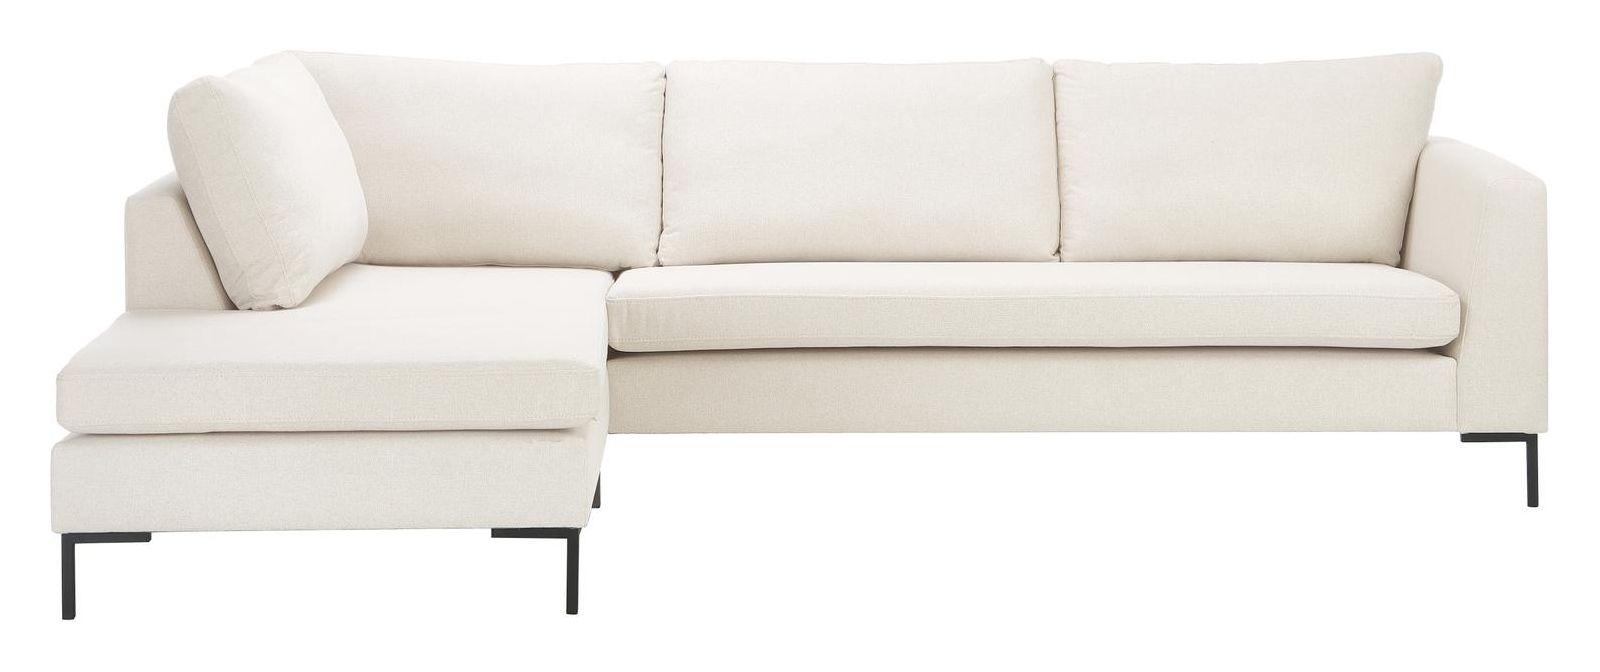 Image of BARI 2,5-pers Sofa open end venstre, Ivory